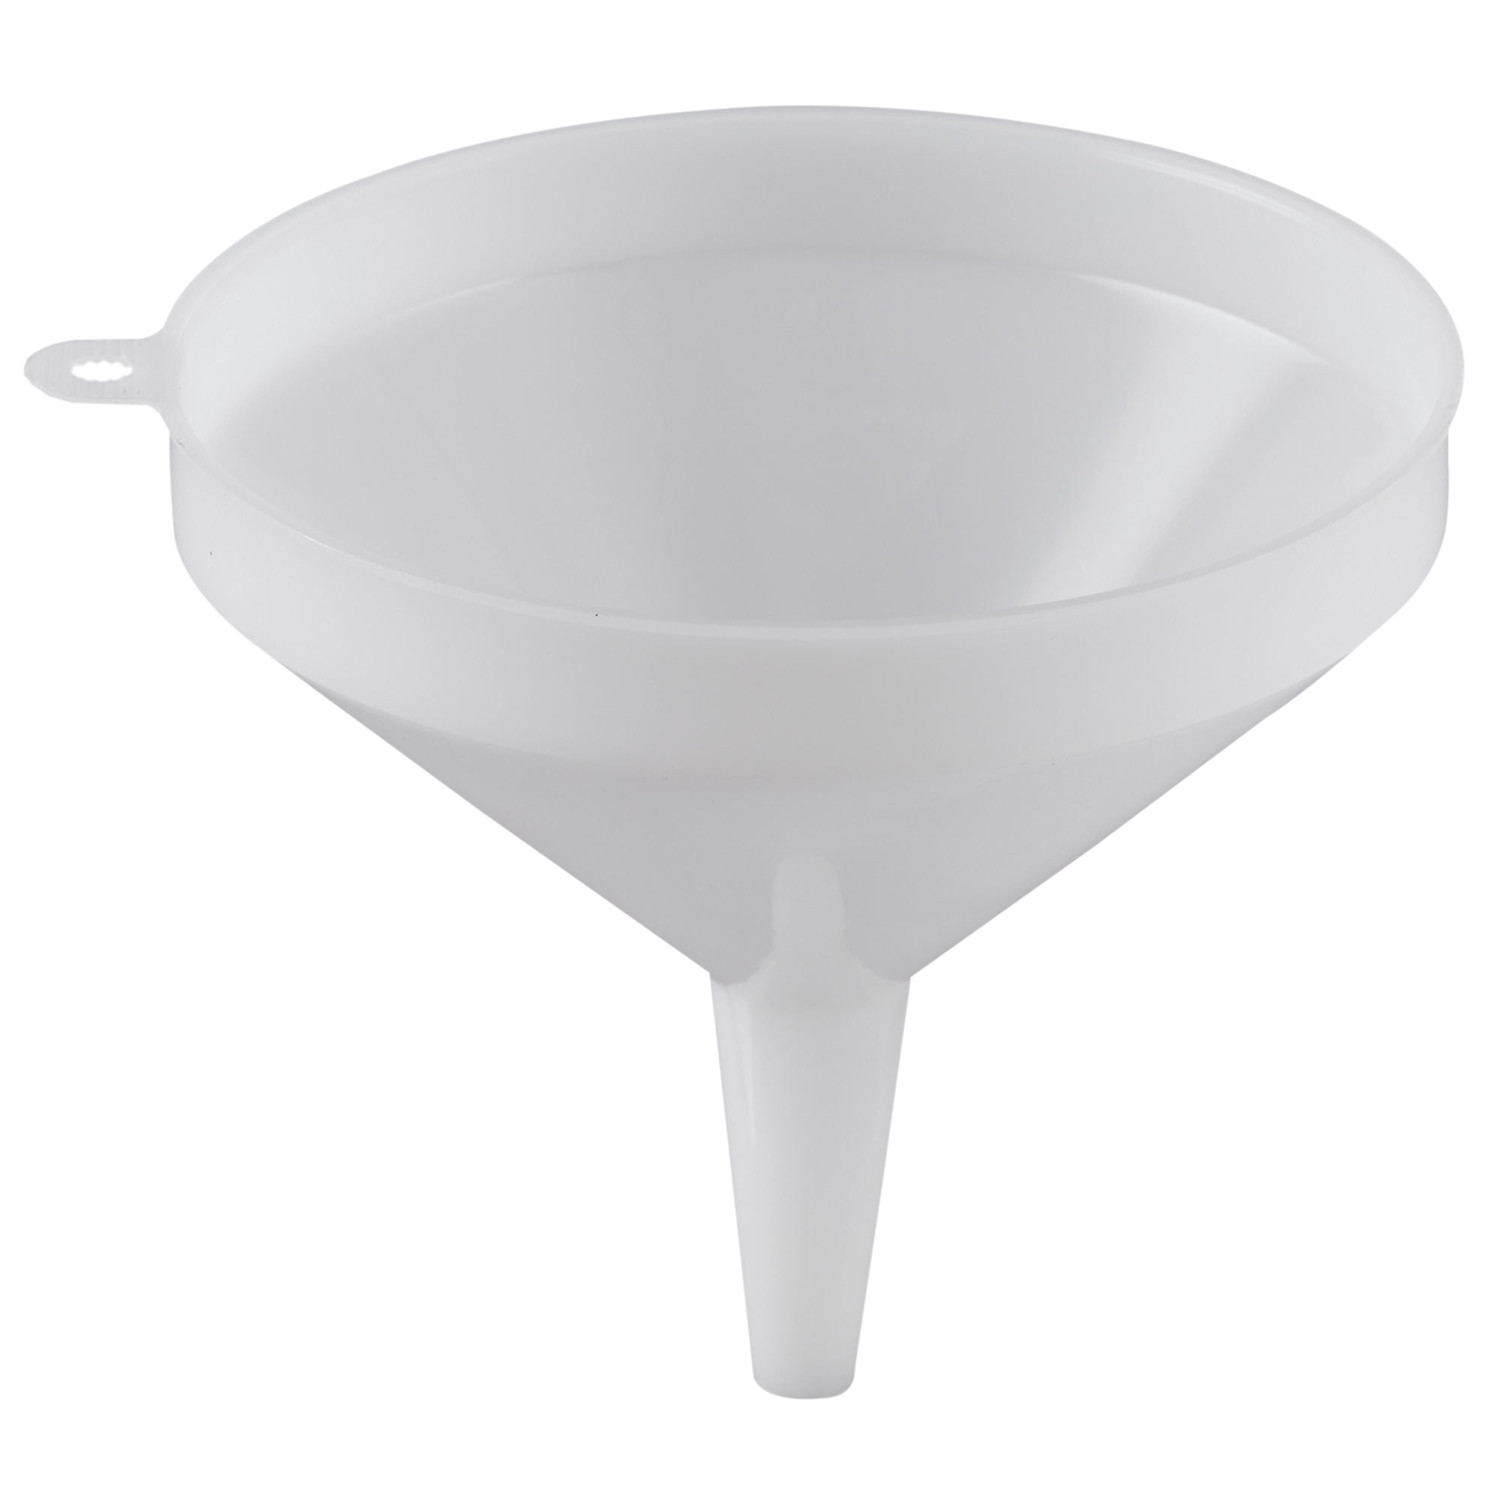 Kuber Industries Multiuses Wide-Mouth Plastic Funnel For Pouring (Tranasparent)